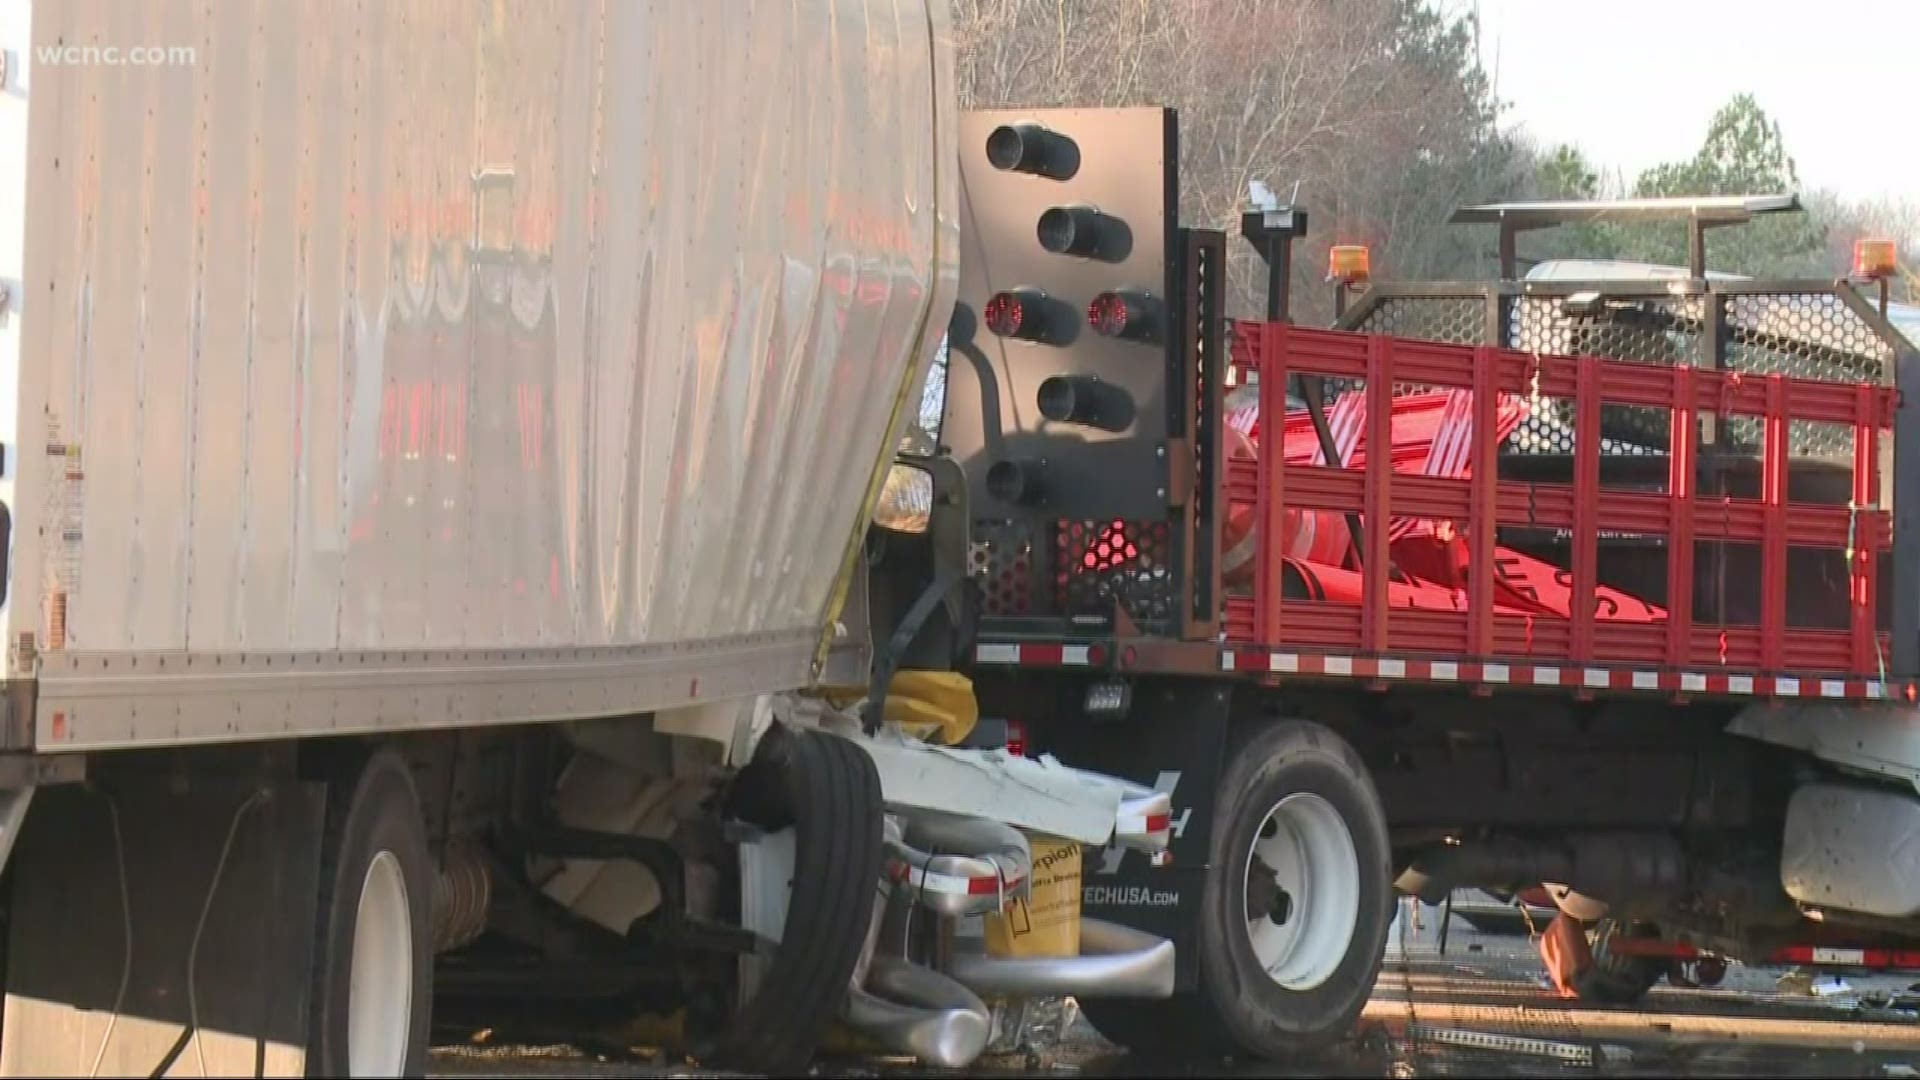 Three construction workers died after a box track slammed into two parked vehicles on I-40 in eastern Iredell County Thursday morning.